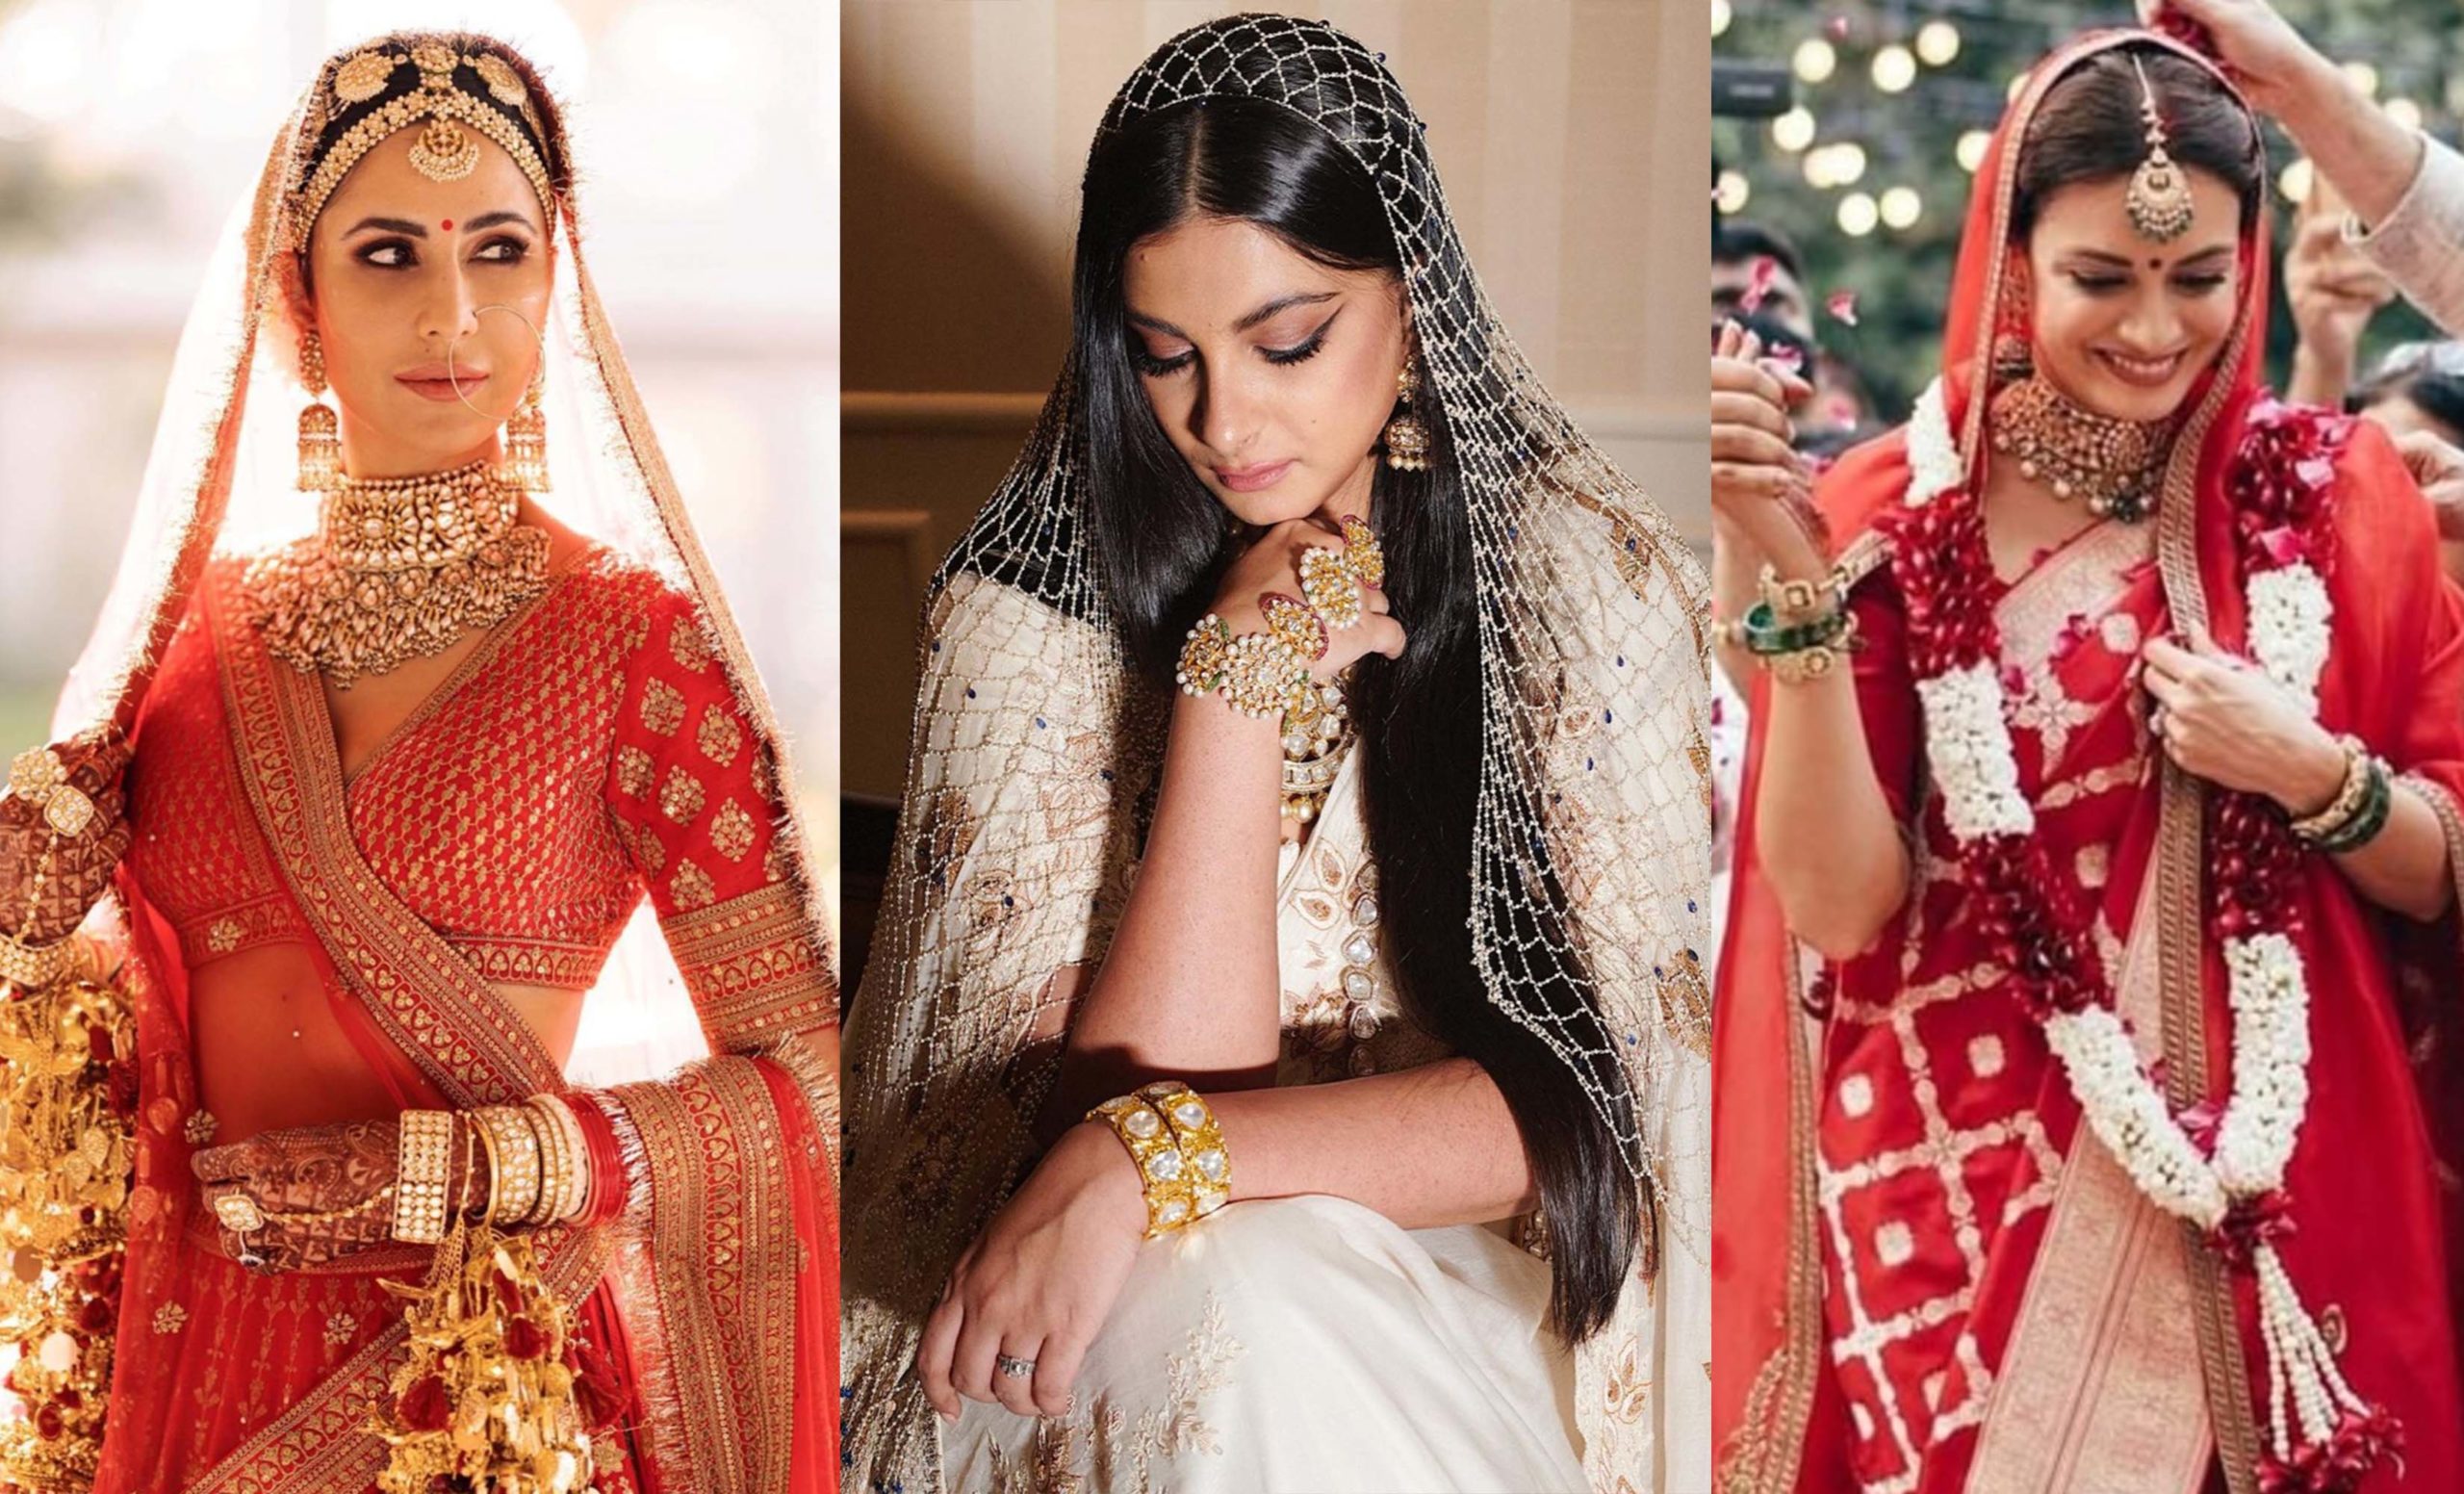 From Lavender Lehengas To Double Dupatta, Here Are Some Celebrity Bridal Trends That Stole The Spotlight In 2021